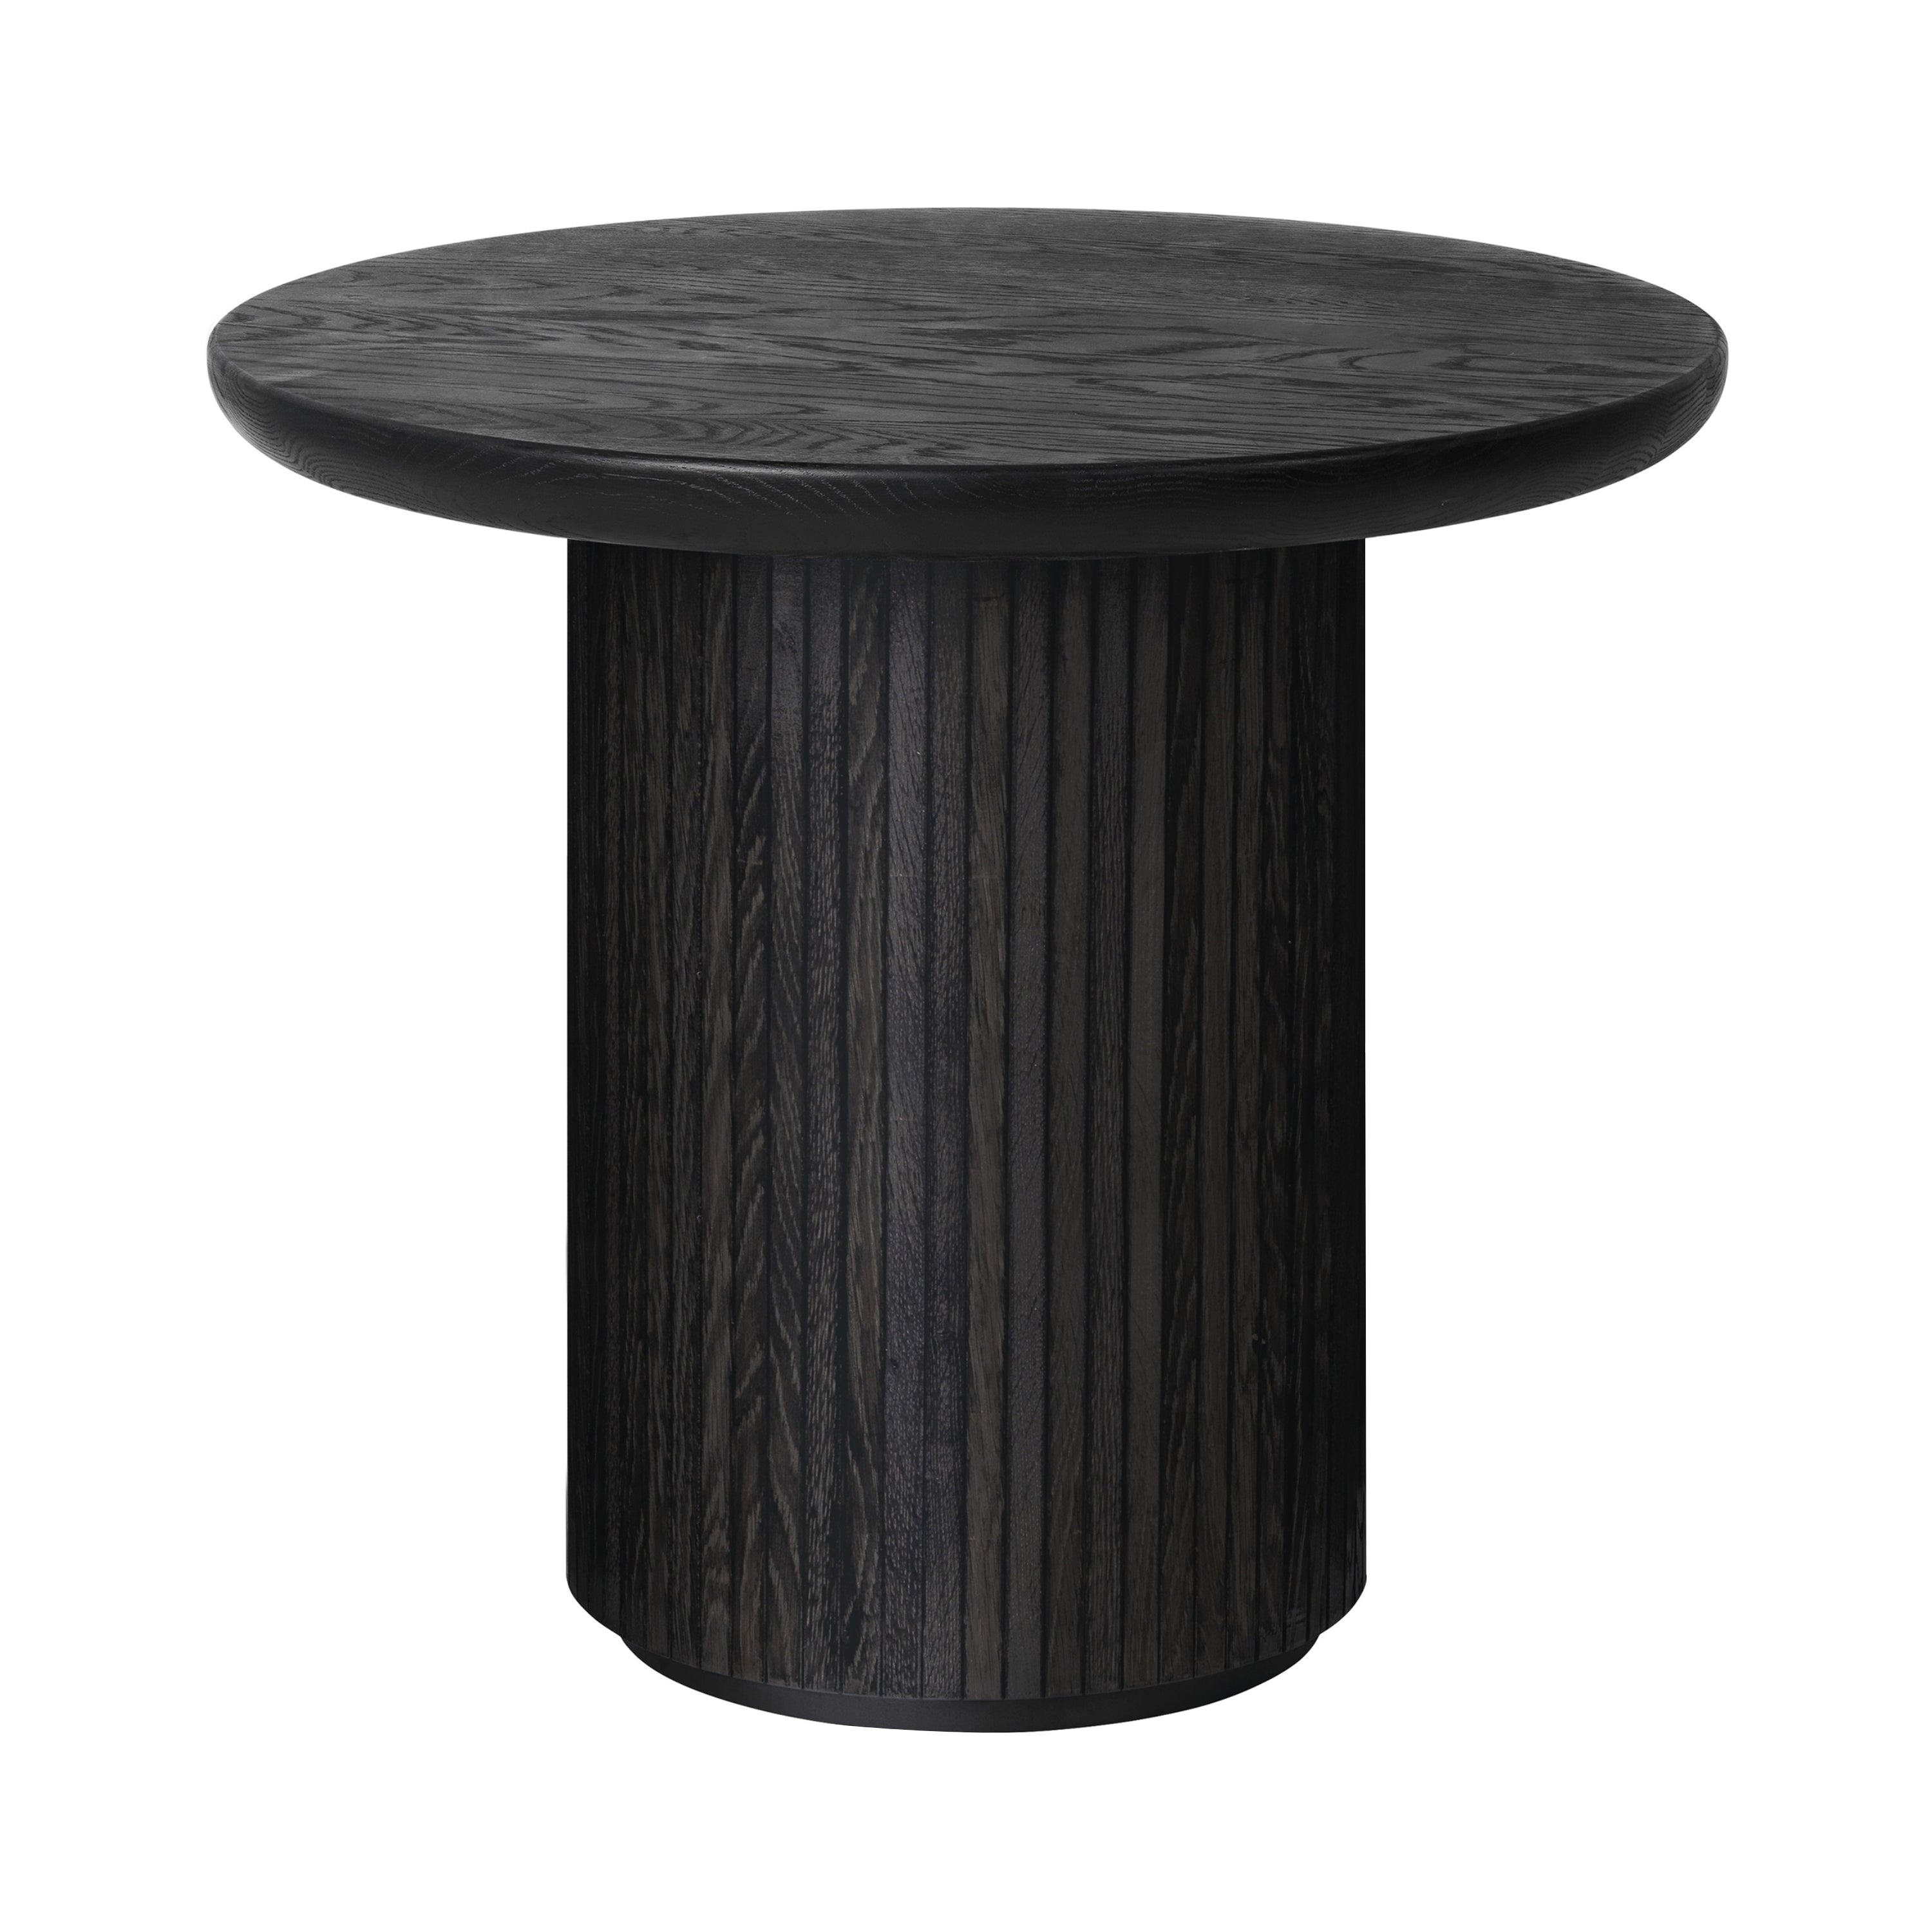 Moon Lounge Table: Brown + Lacquered Black Stained Oak